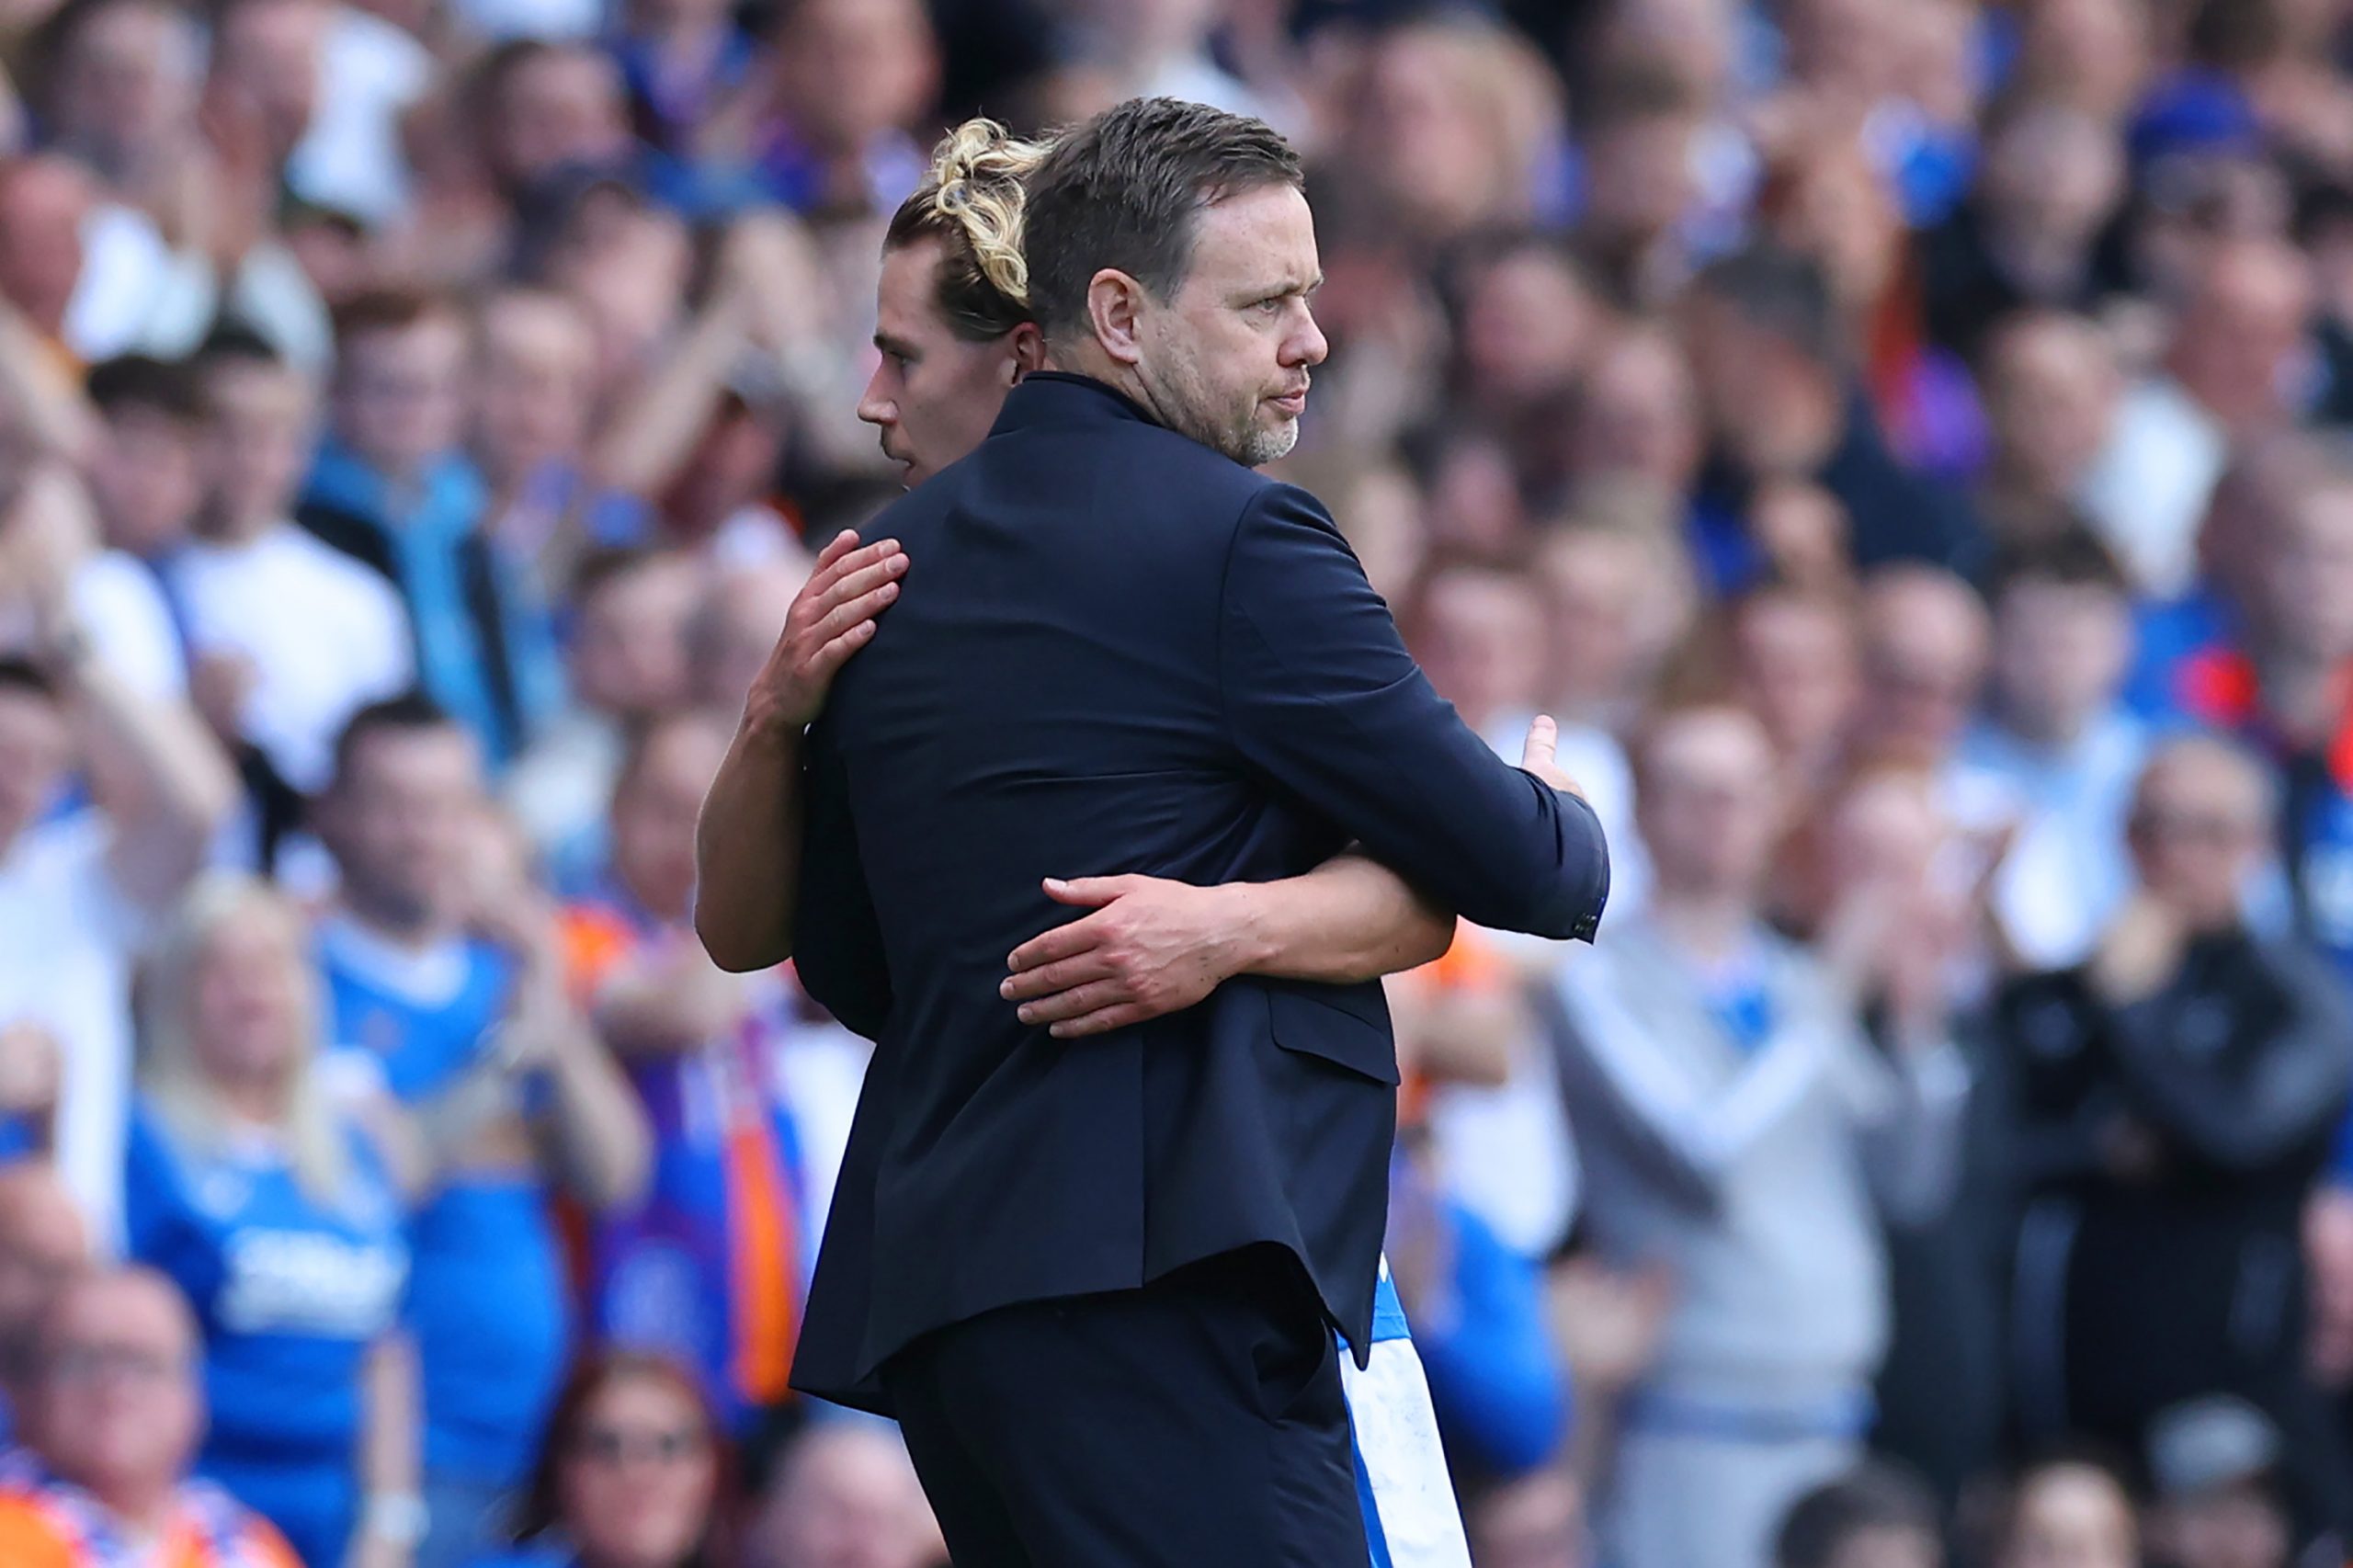 GLASGOW, SCOTLAND - MAY 13: Michael Beale embraces Todd Cantwell of Rangers FC as they are substituted off during the Cinch Premiership match between Rangers and Celtic at Ibrox Stadium on May 13, 2023 in Glasgow, Scotland. (Photo by Ian MacNicol/Getty Images)